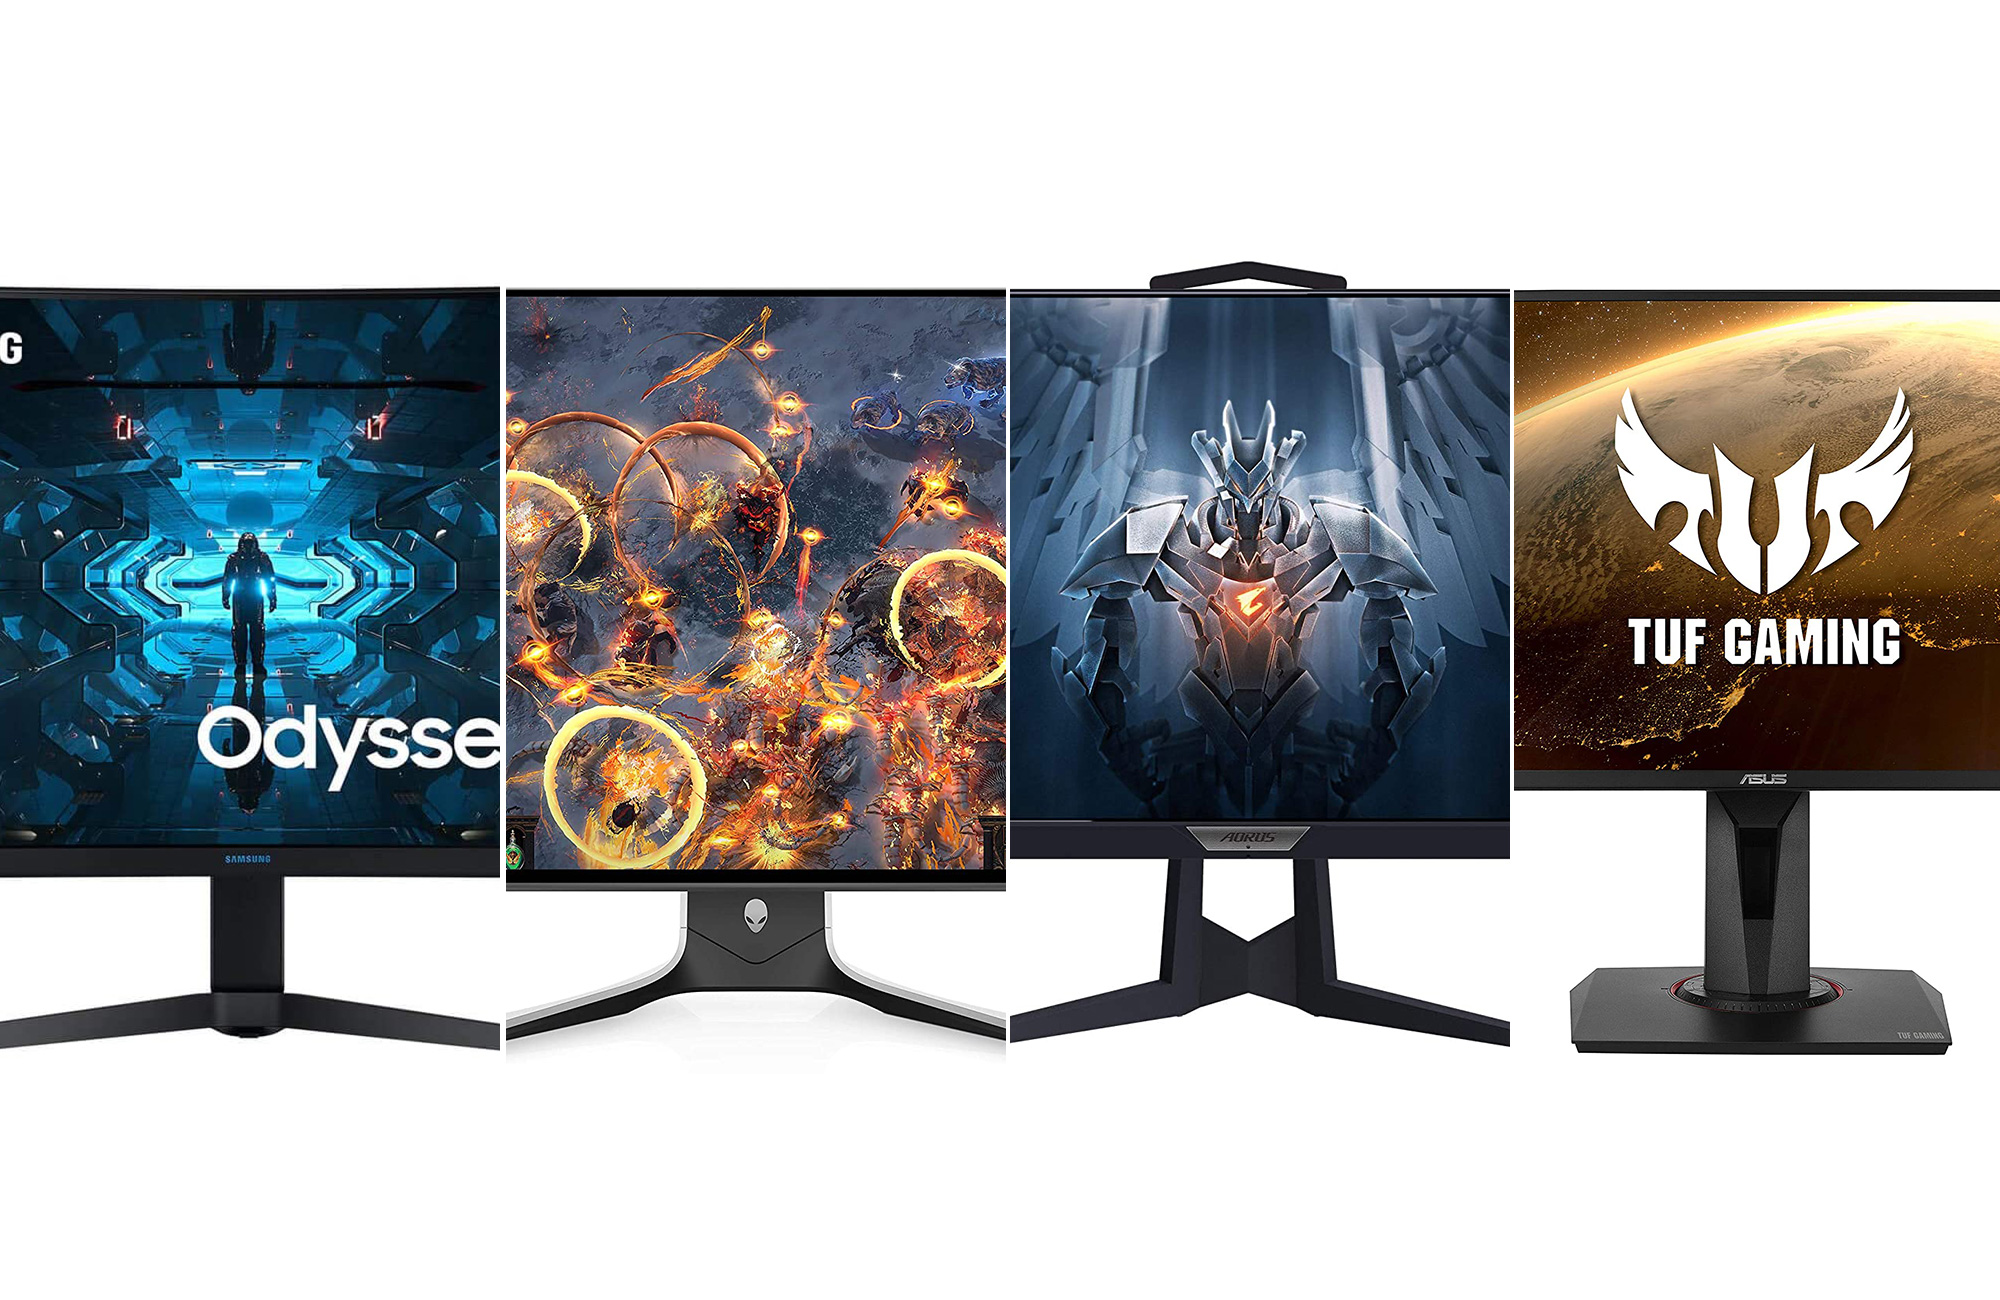 Save $100 on This 240 Hz Gaming Monitor From Samsung